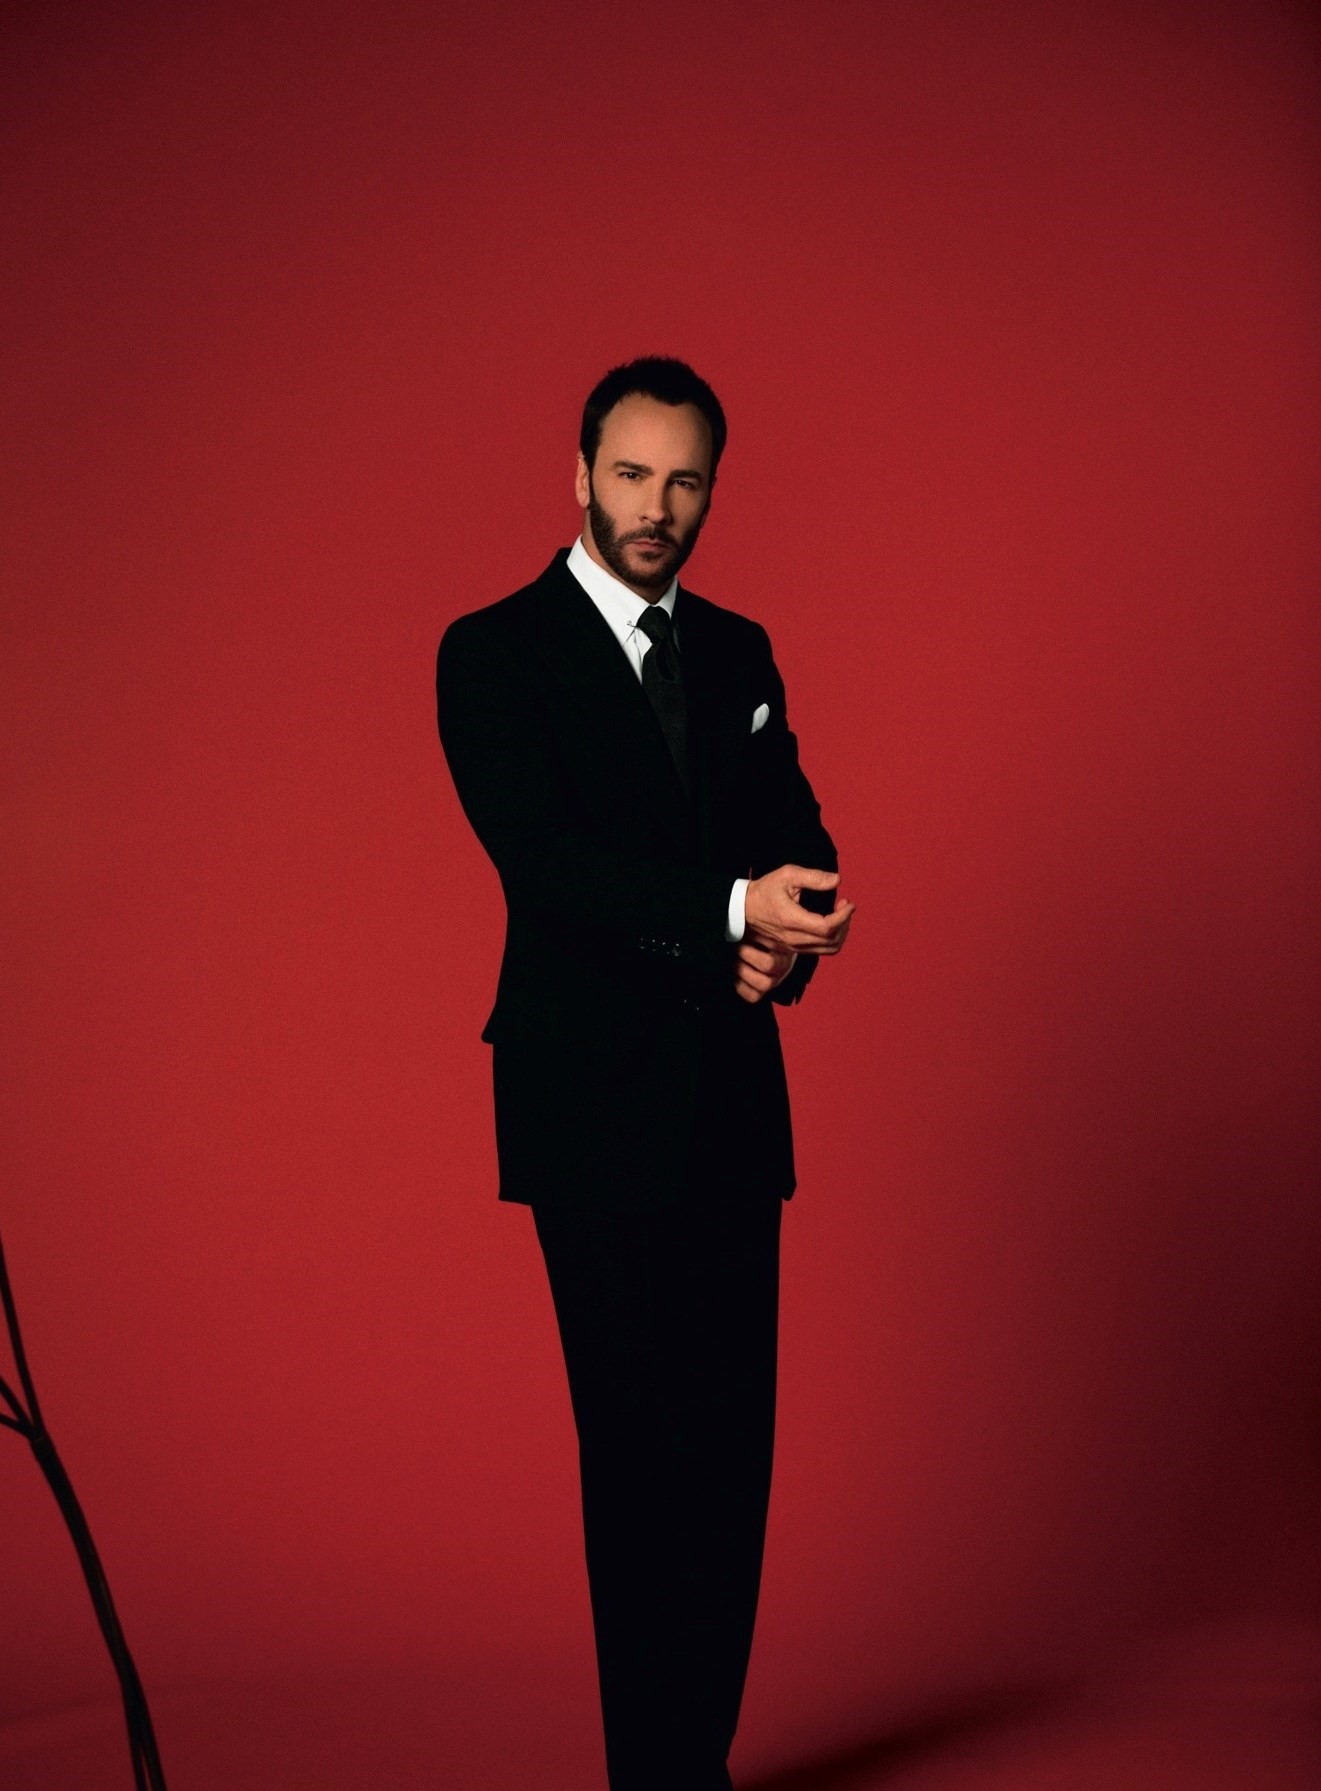 Tom Ford Quits His Eponymous Label